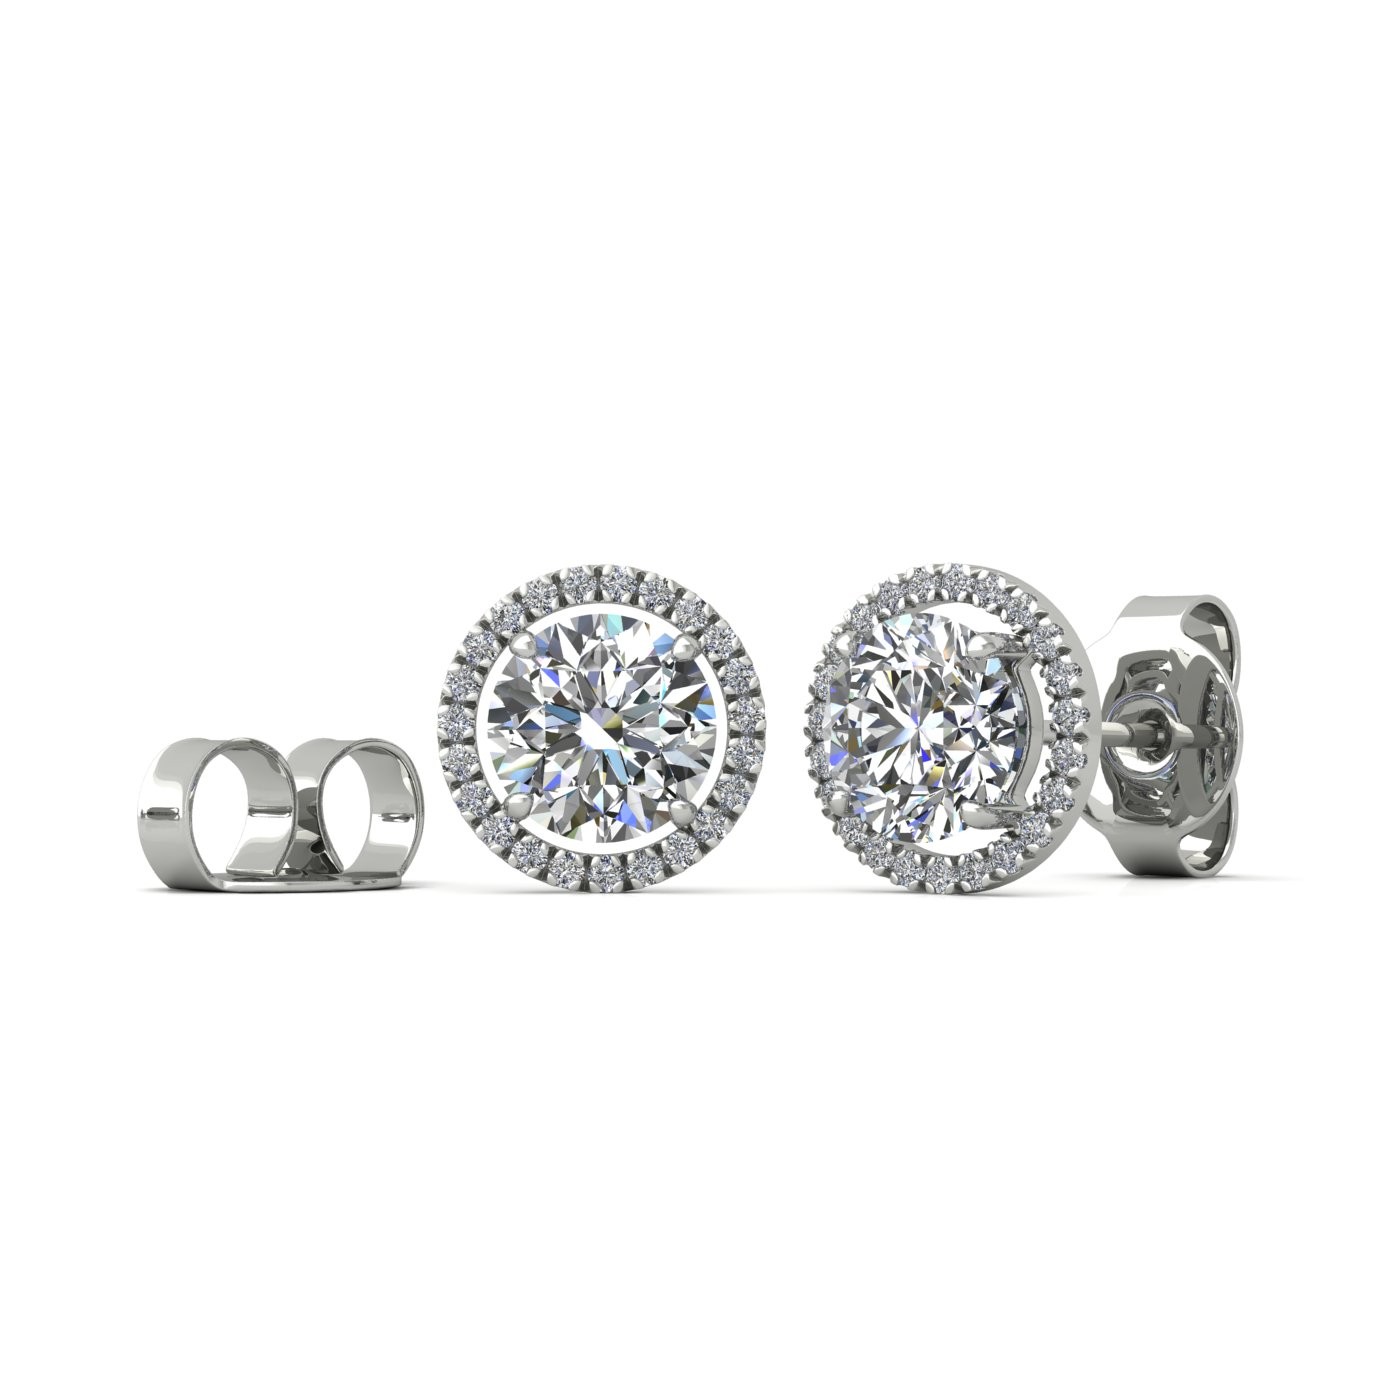 18k white gold  2,5 ct each (5 tcw) 4 prongs round brilliant cut halo diamond earring studs Photos & images